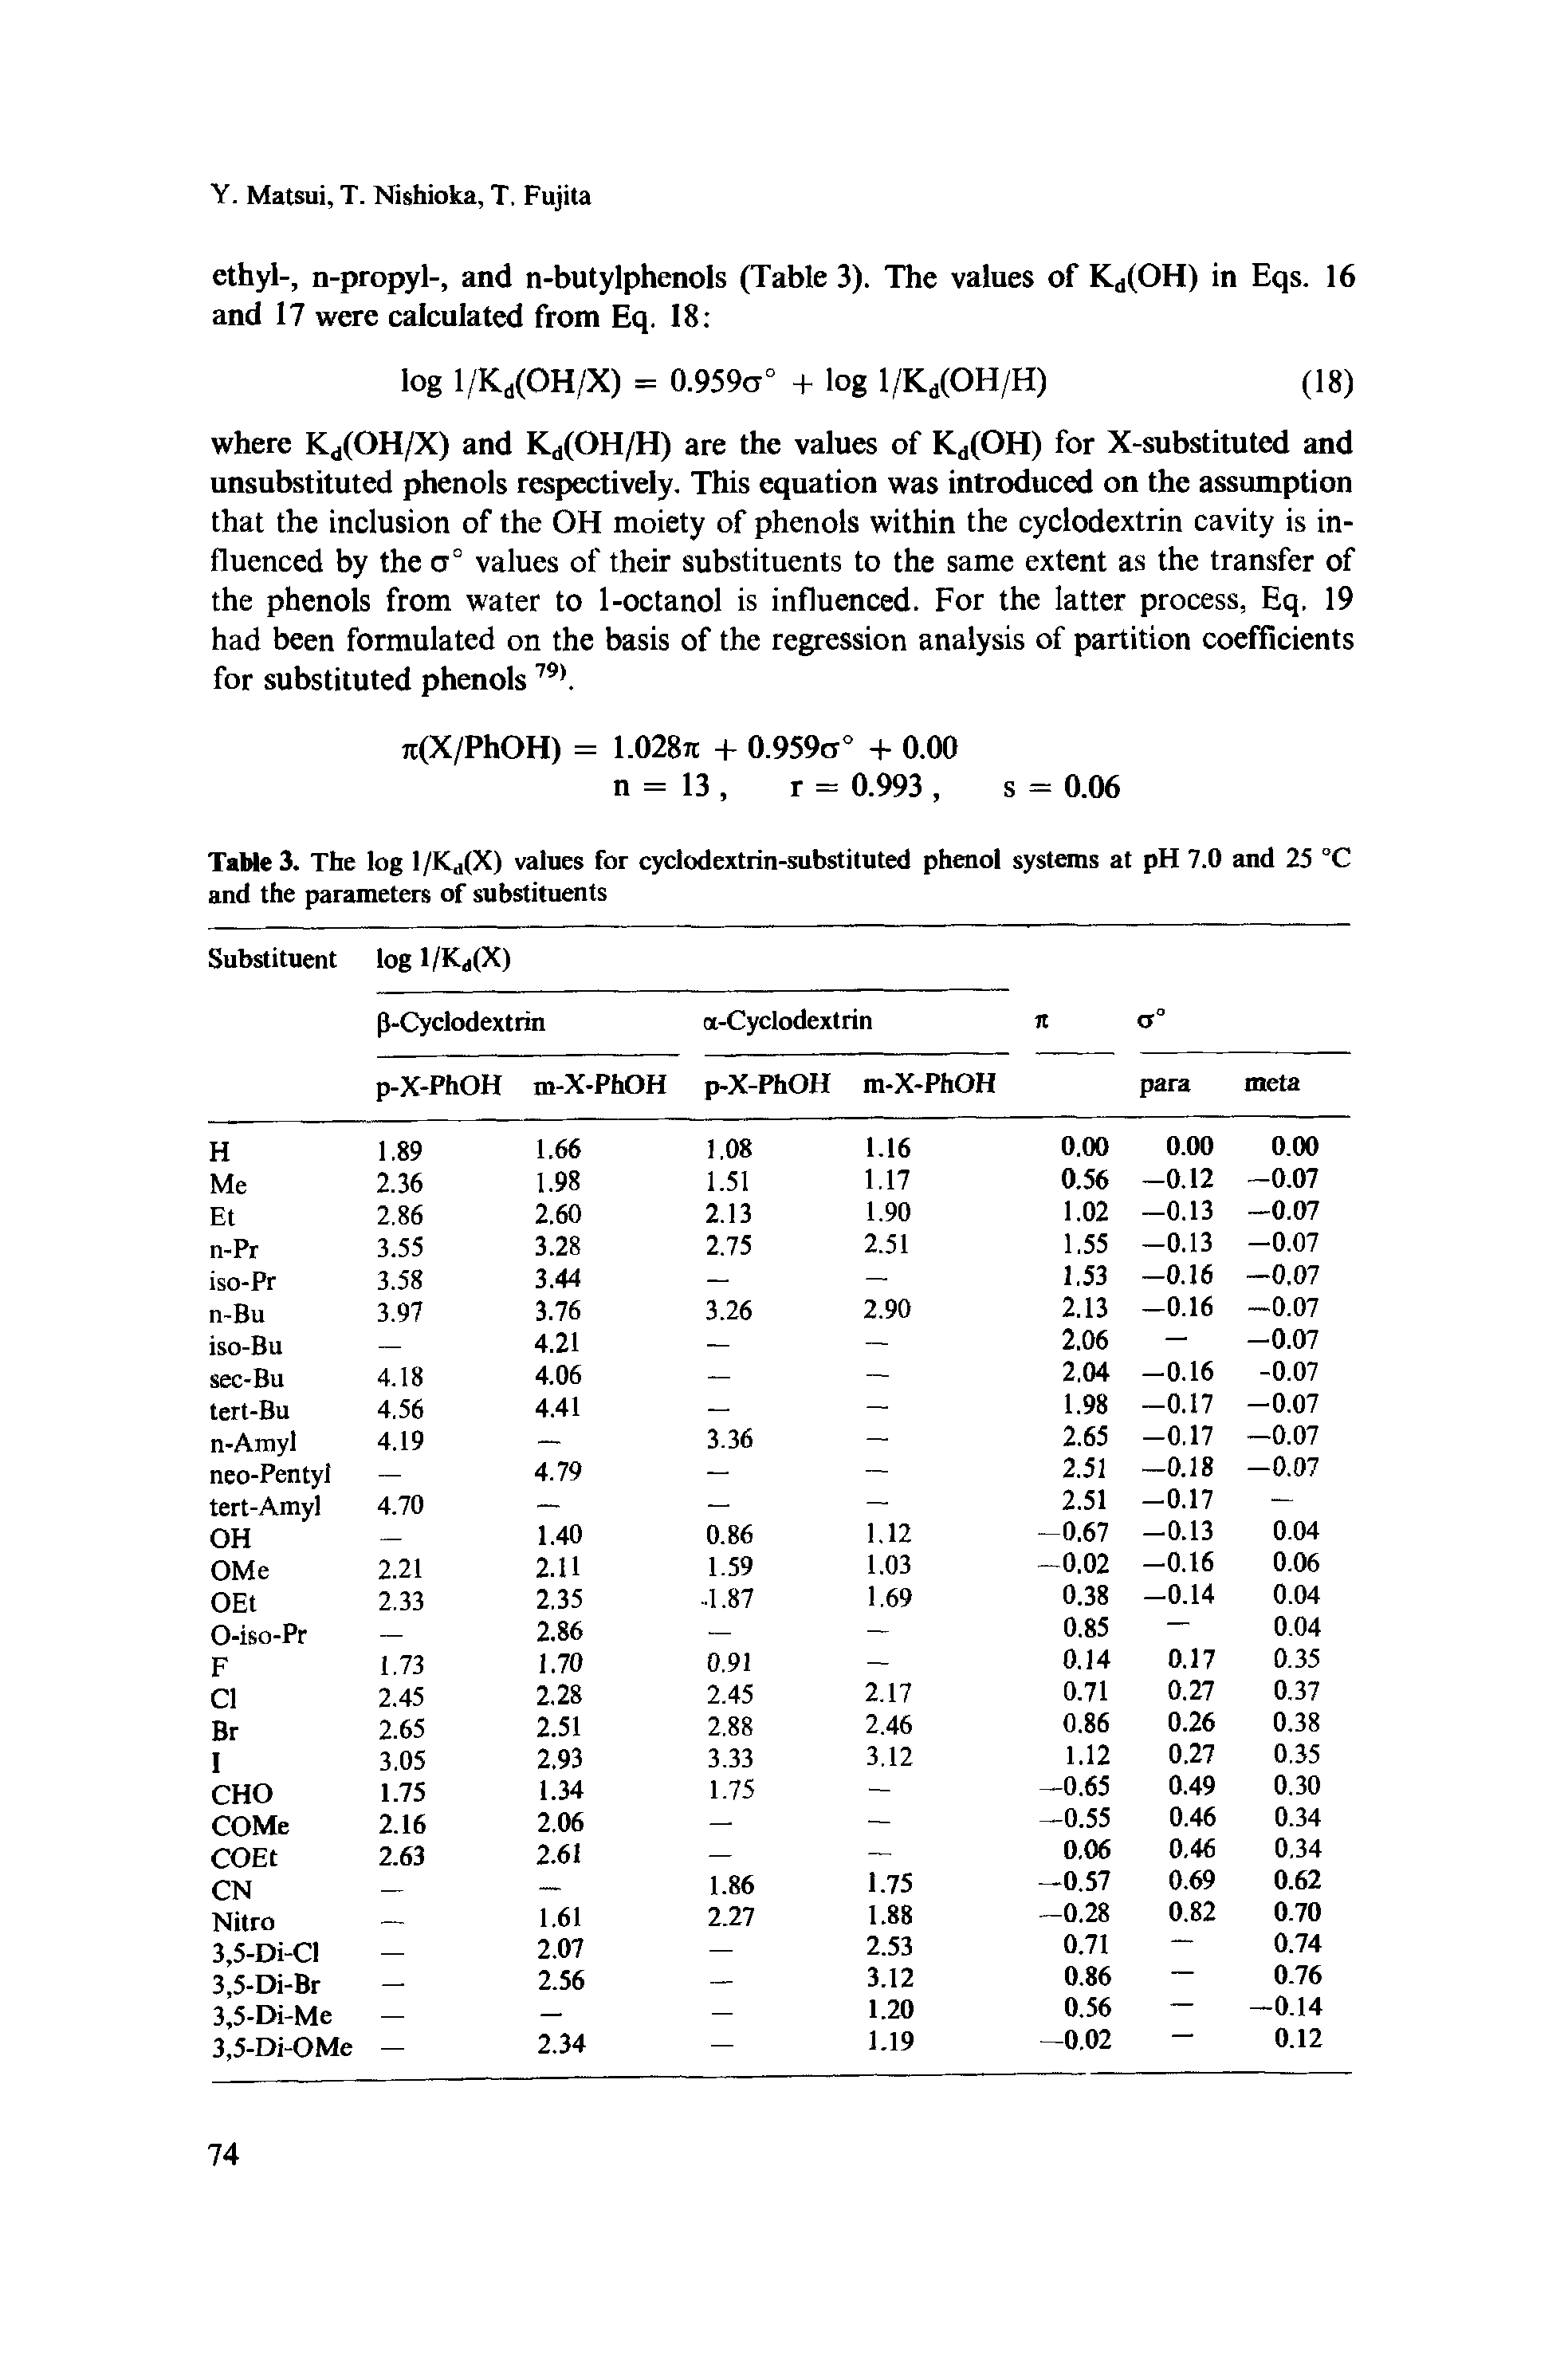 Table 3. The log 1 /Kd(X) values for cyclodextrin-substituted phenol systems at pH 7.0 and 25 °C and the parameters of substituents...